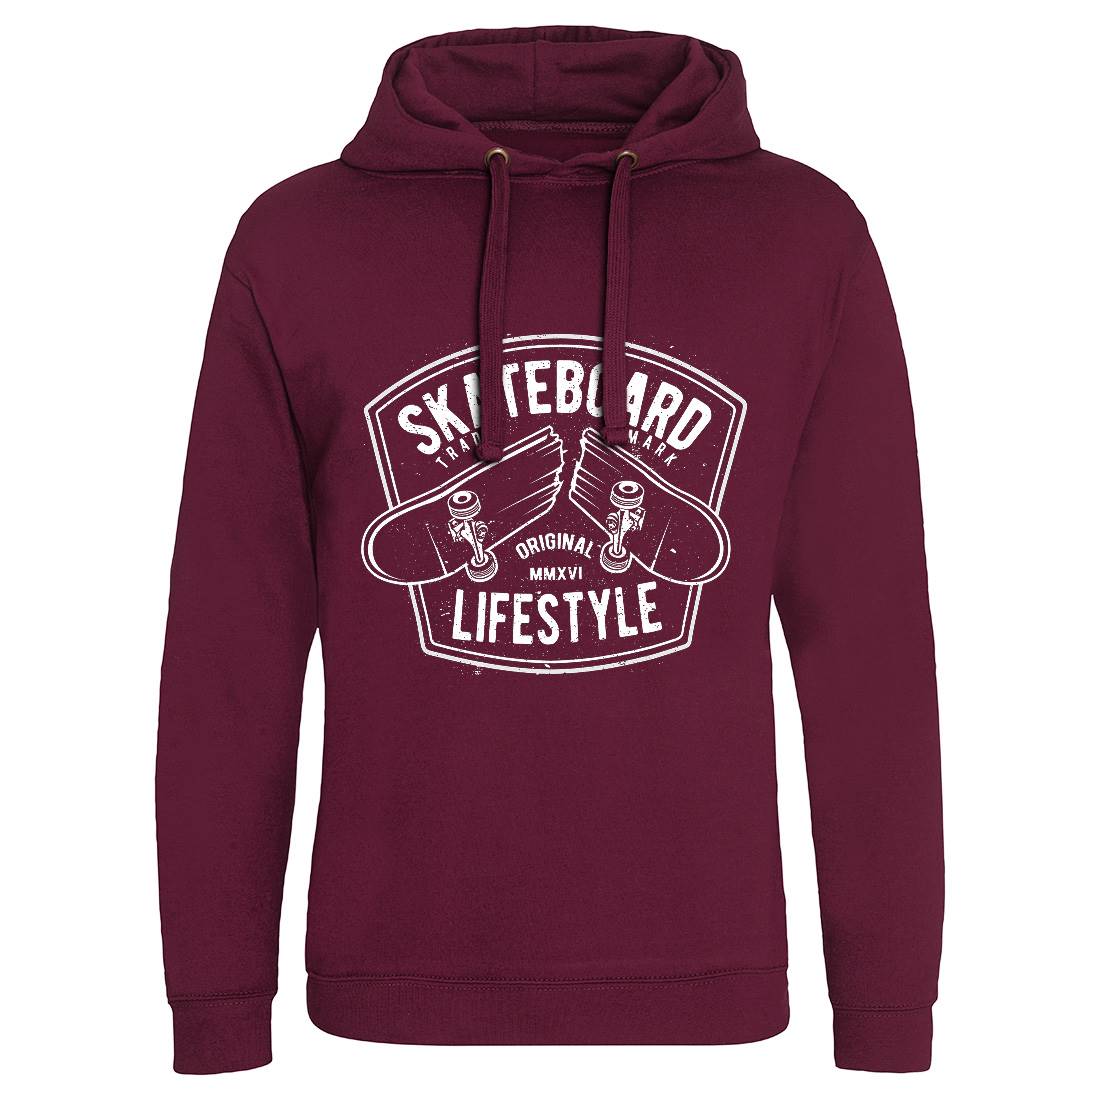 Skateboard Lifestyle Mens Hoodie Without Pocket Skate A145